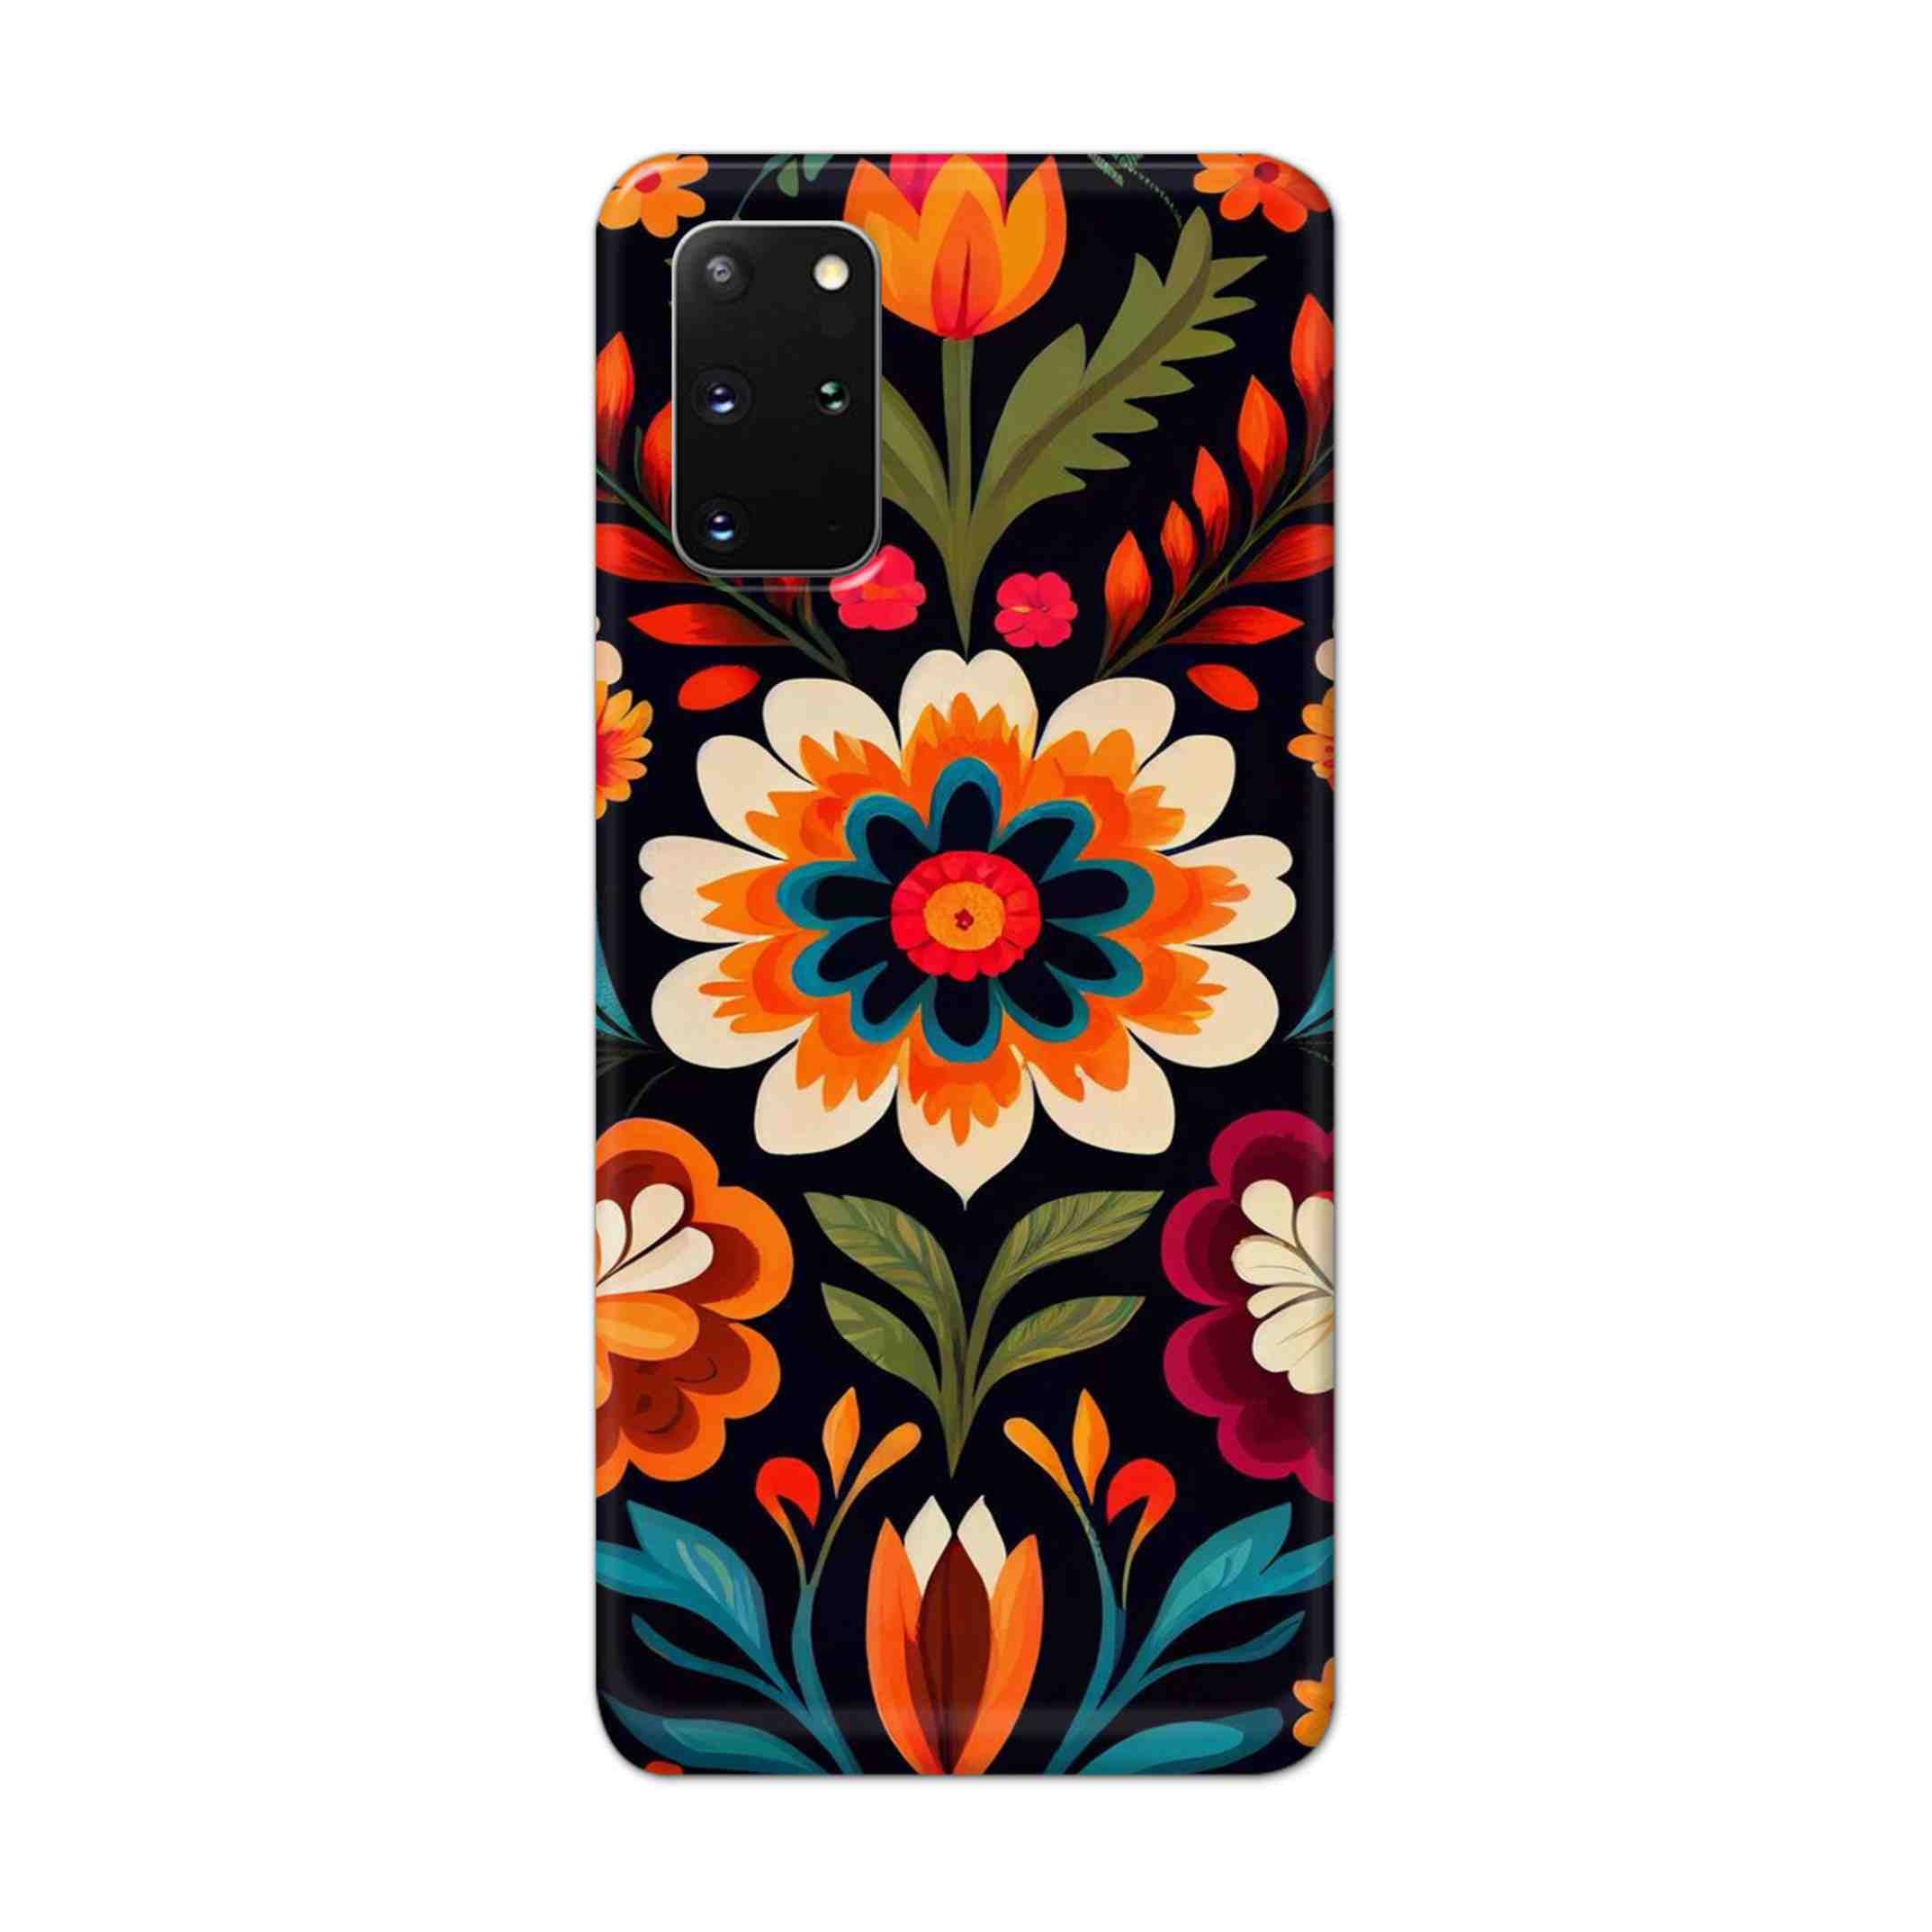 Buy Flower Hard Back Mobile Phone Case Cover For Samsung Galaxy S20 Plus Online